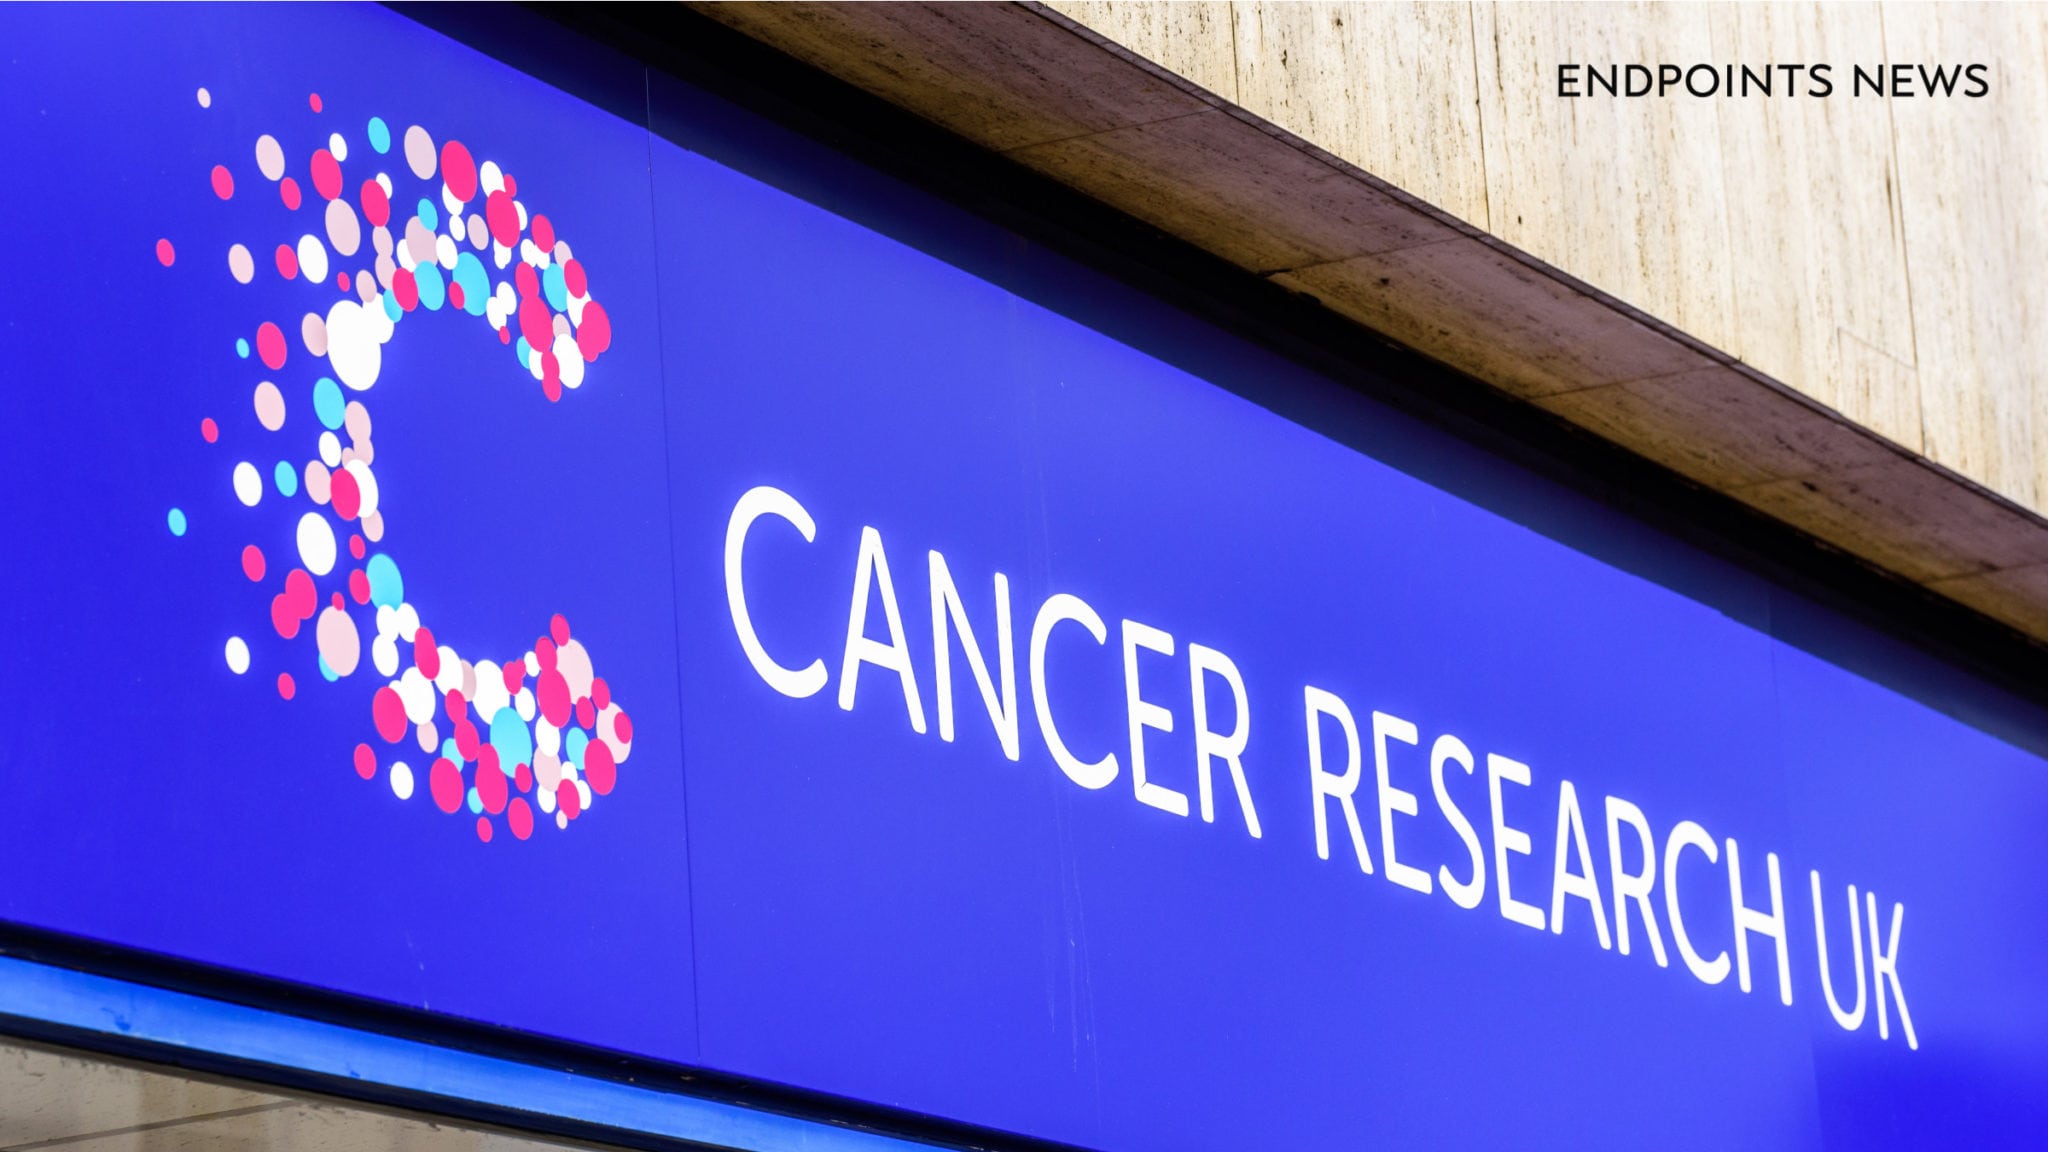 what is the mission statement of cancer research uk